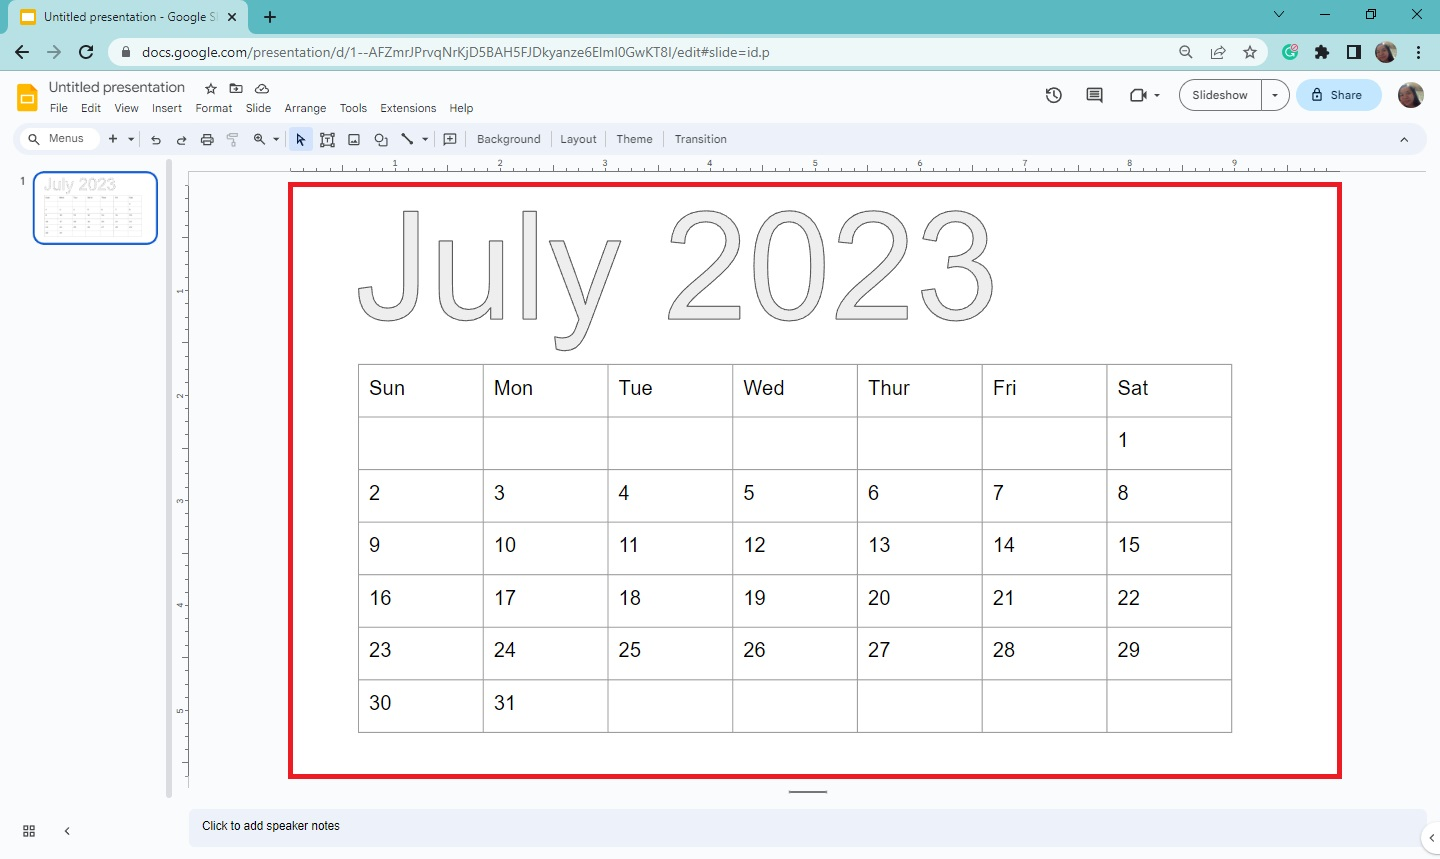 You have now successfully inserted calendar on Google Slides.